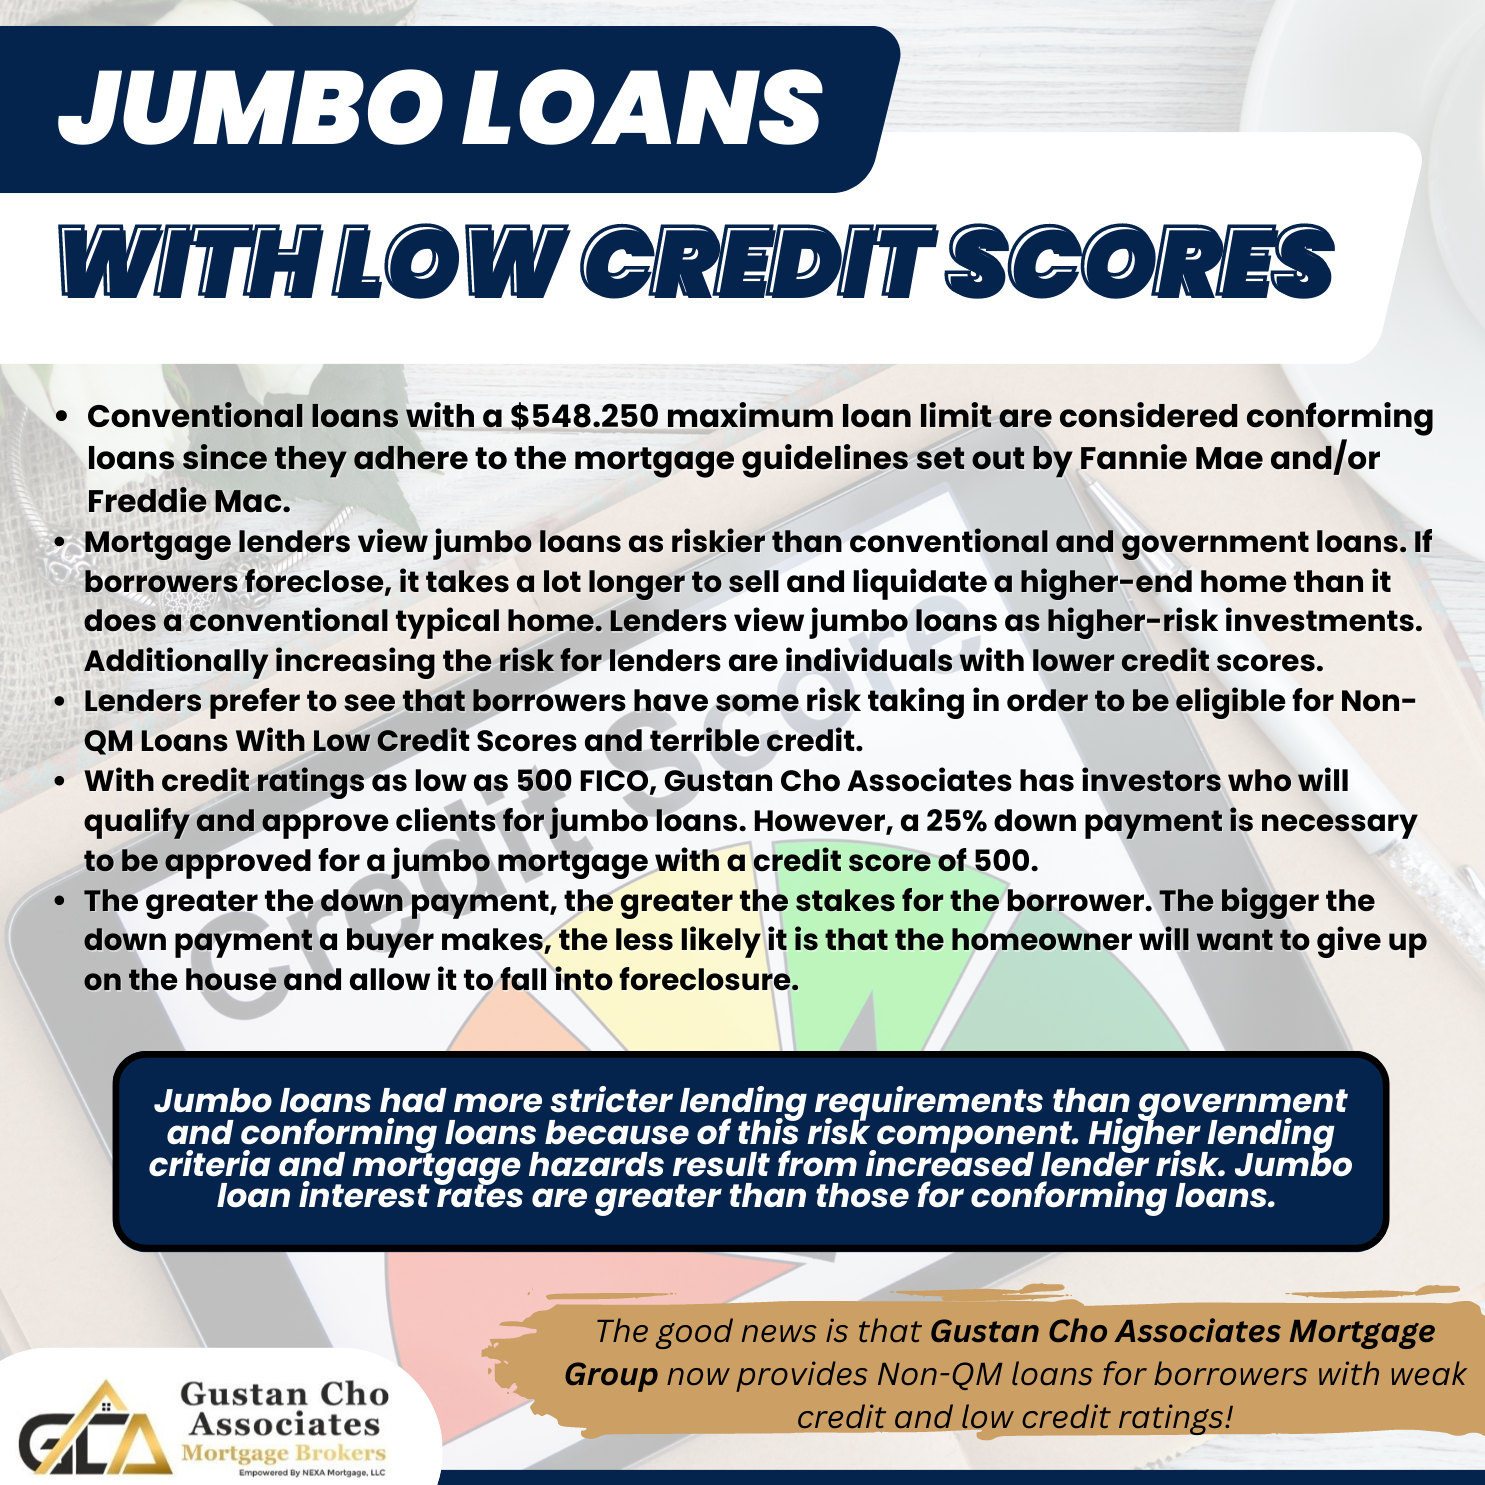 Jumbo Loans With Low Credit Scores